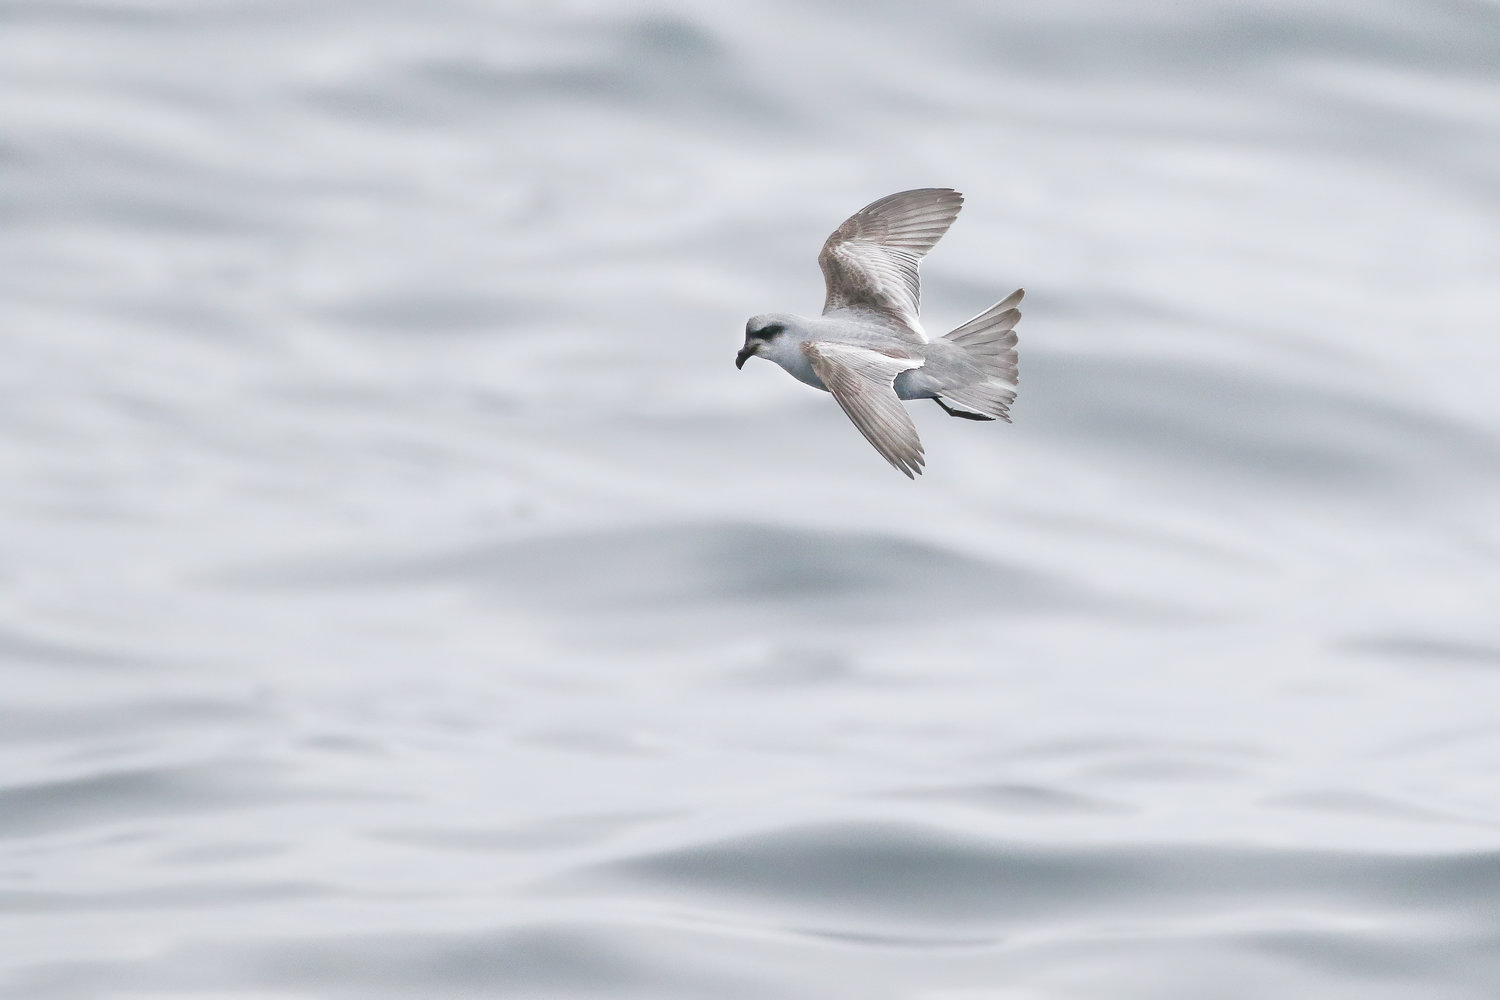 Fork-tailed Storm Petrel - a small bird feeding far offshore